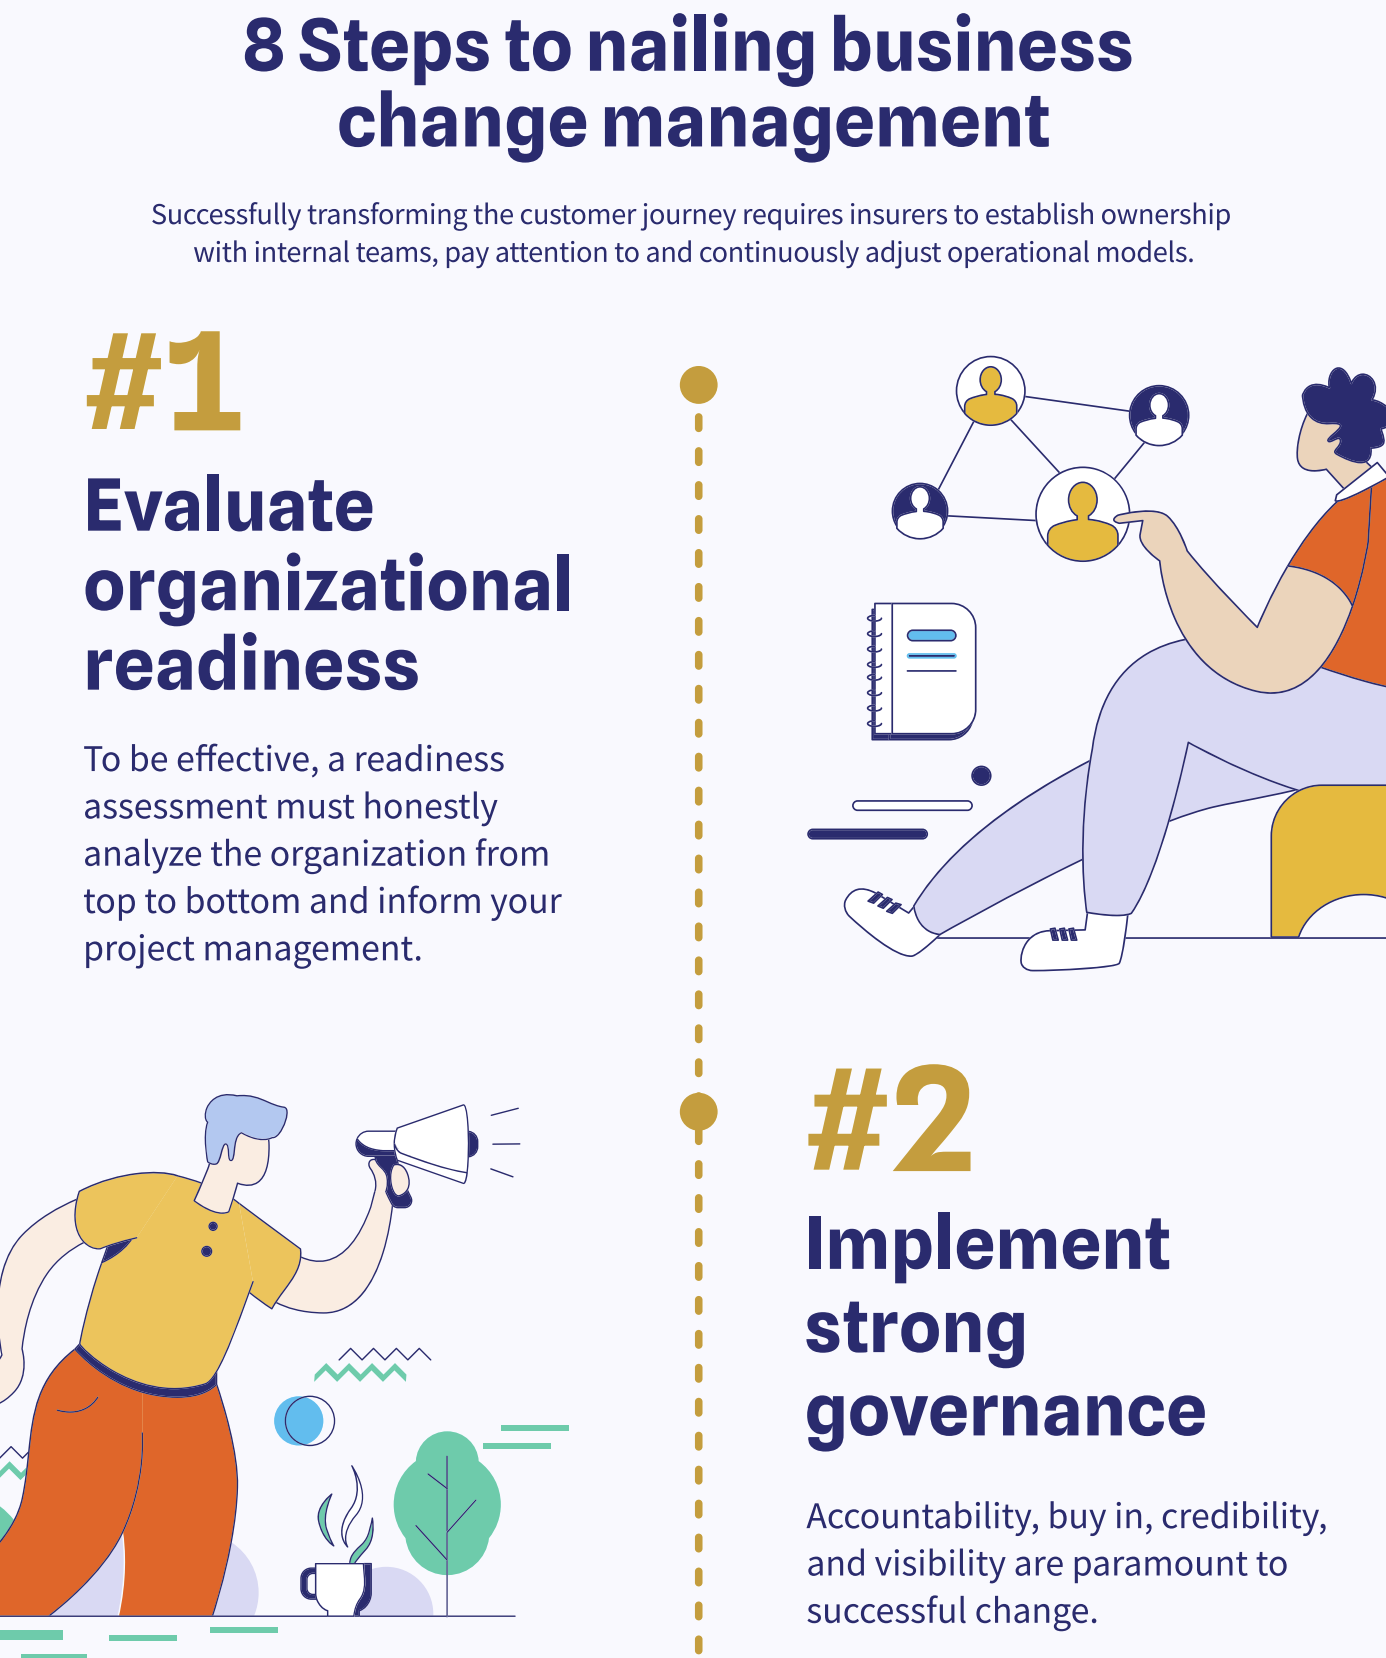 EIS Ambitious Life Insurer 8 Steps to Change Management Infographic - EIS